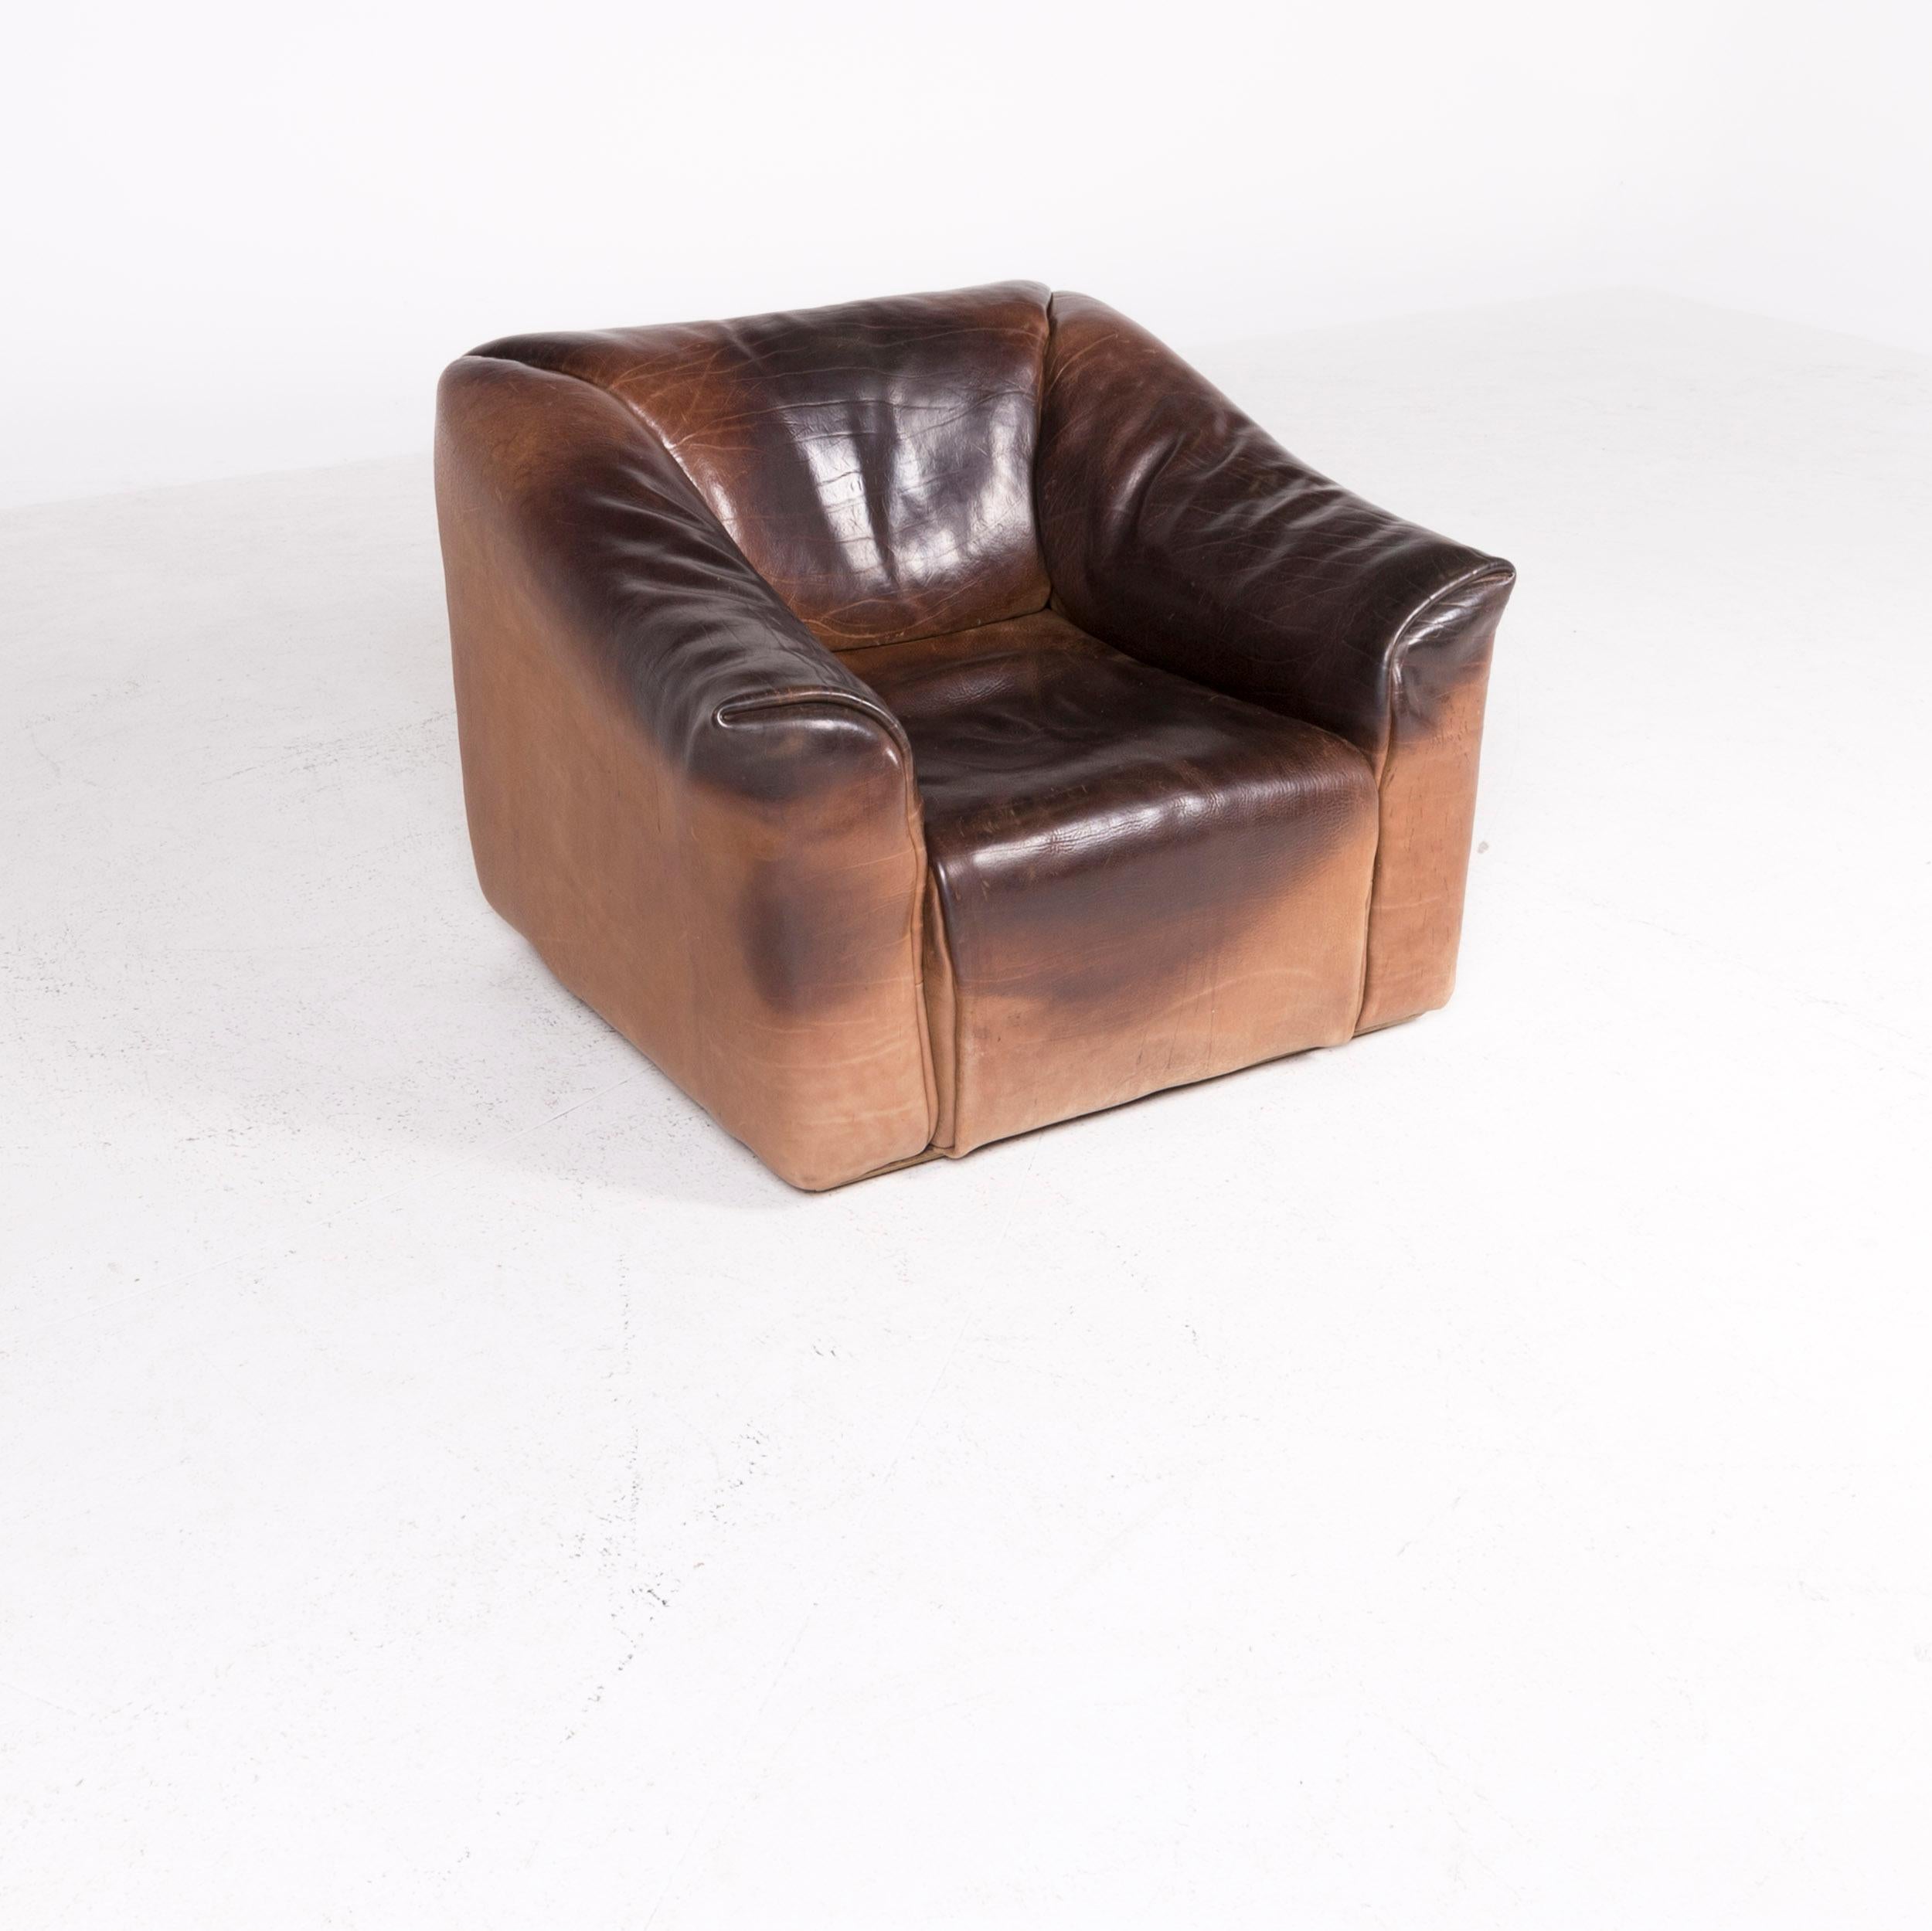 We bring to you a De Sede DS 47 designer leather armchair brown genuine leather aniline.
   
Product measurements in centimeters:

Depth 55
Width 90
Height 70
Seat-height 39
Rest-height 54
Seat-depth 66
Seat-width 137
Back-height 33.
   